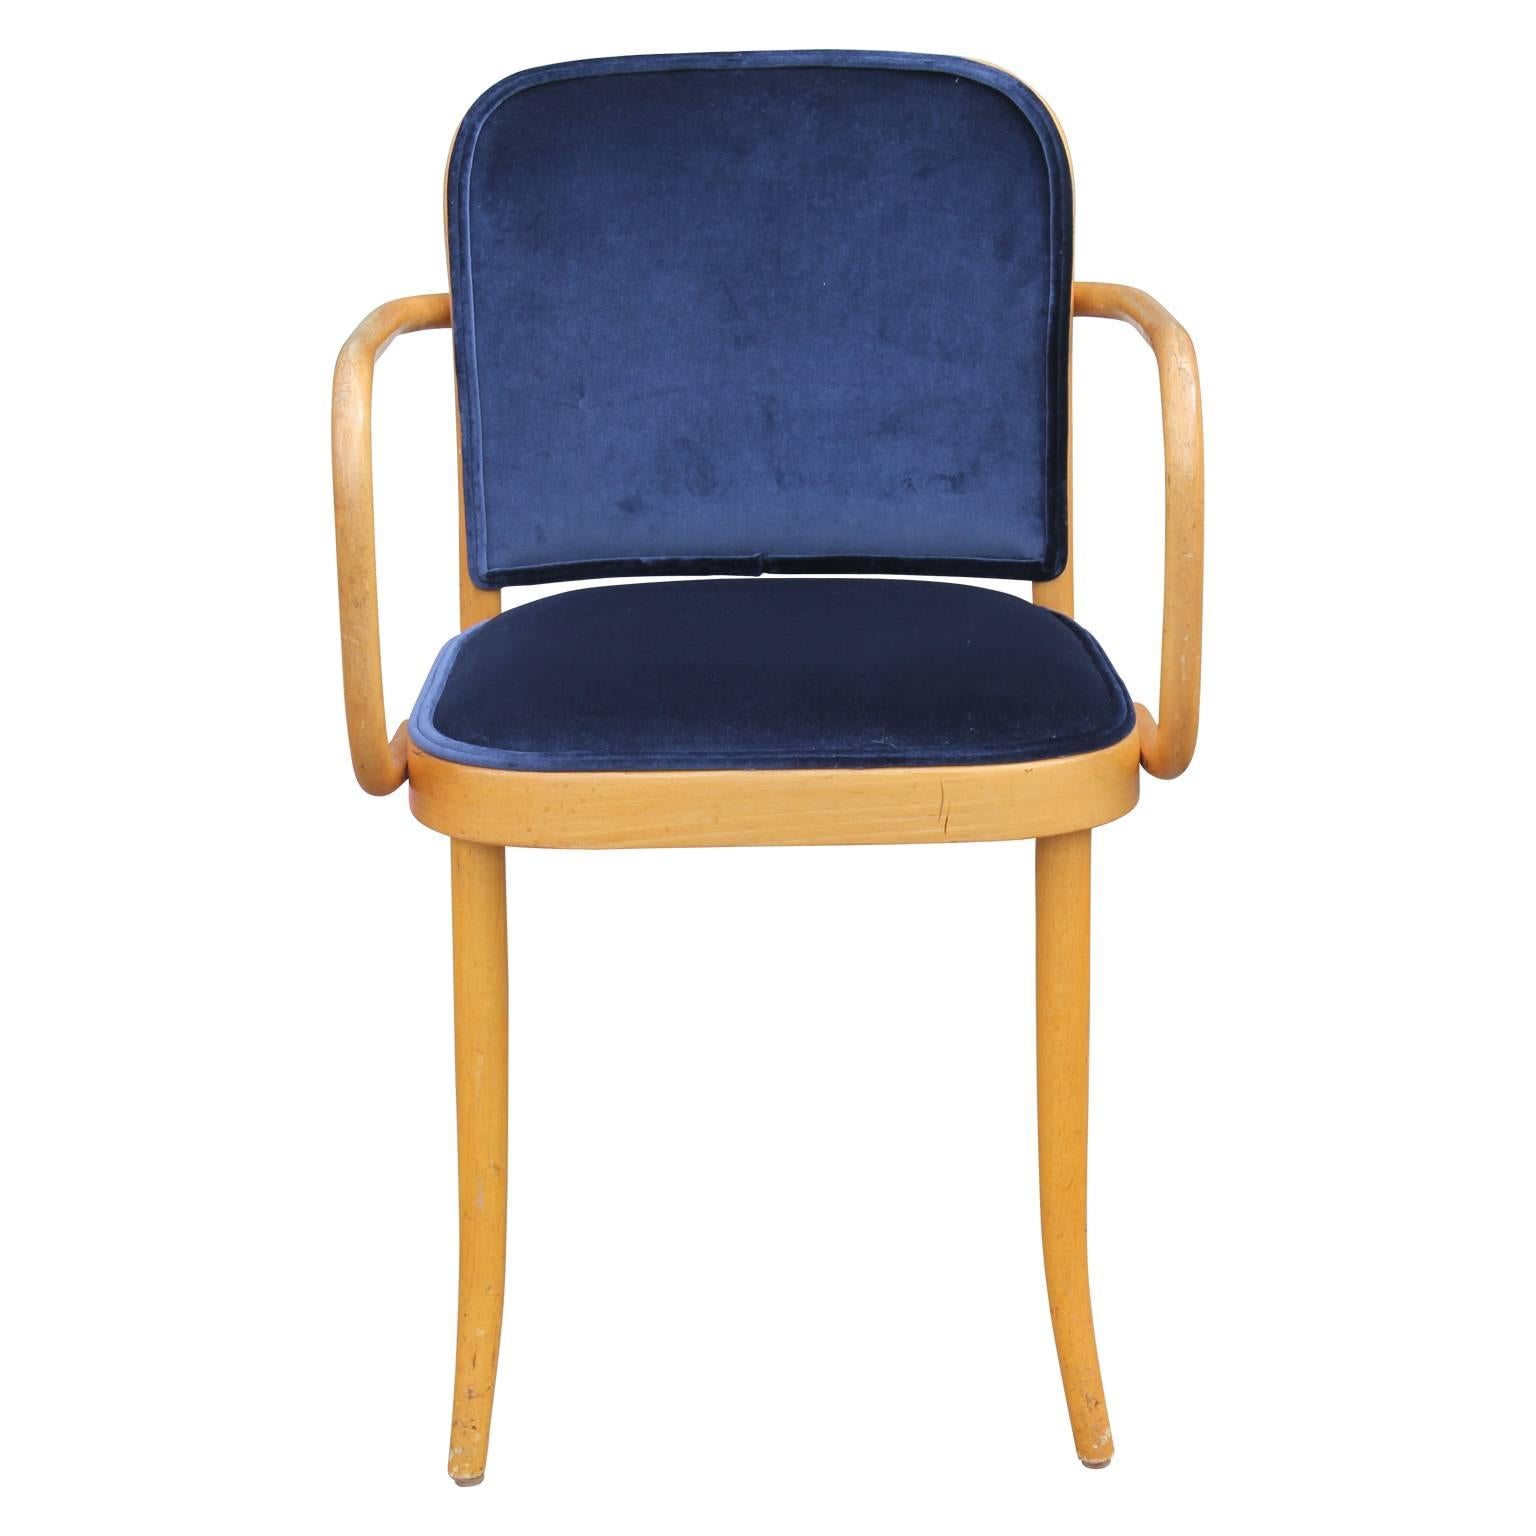 Set of ten modern Josef Hoffmann Thonet bentwood No 811, dining chairs. Freshly upholstered in a lovely deep blue velvet. Perfect as dining chairs or used as a side chair here and there. 